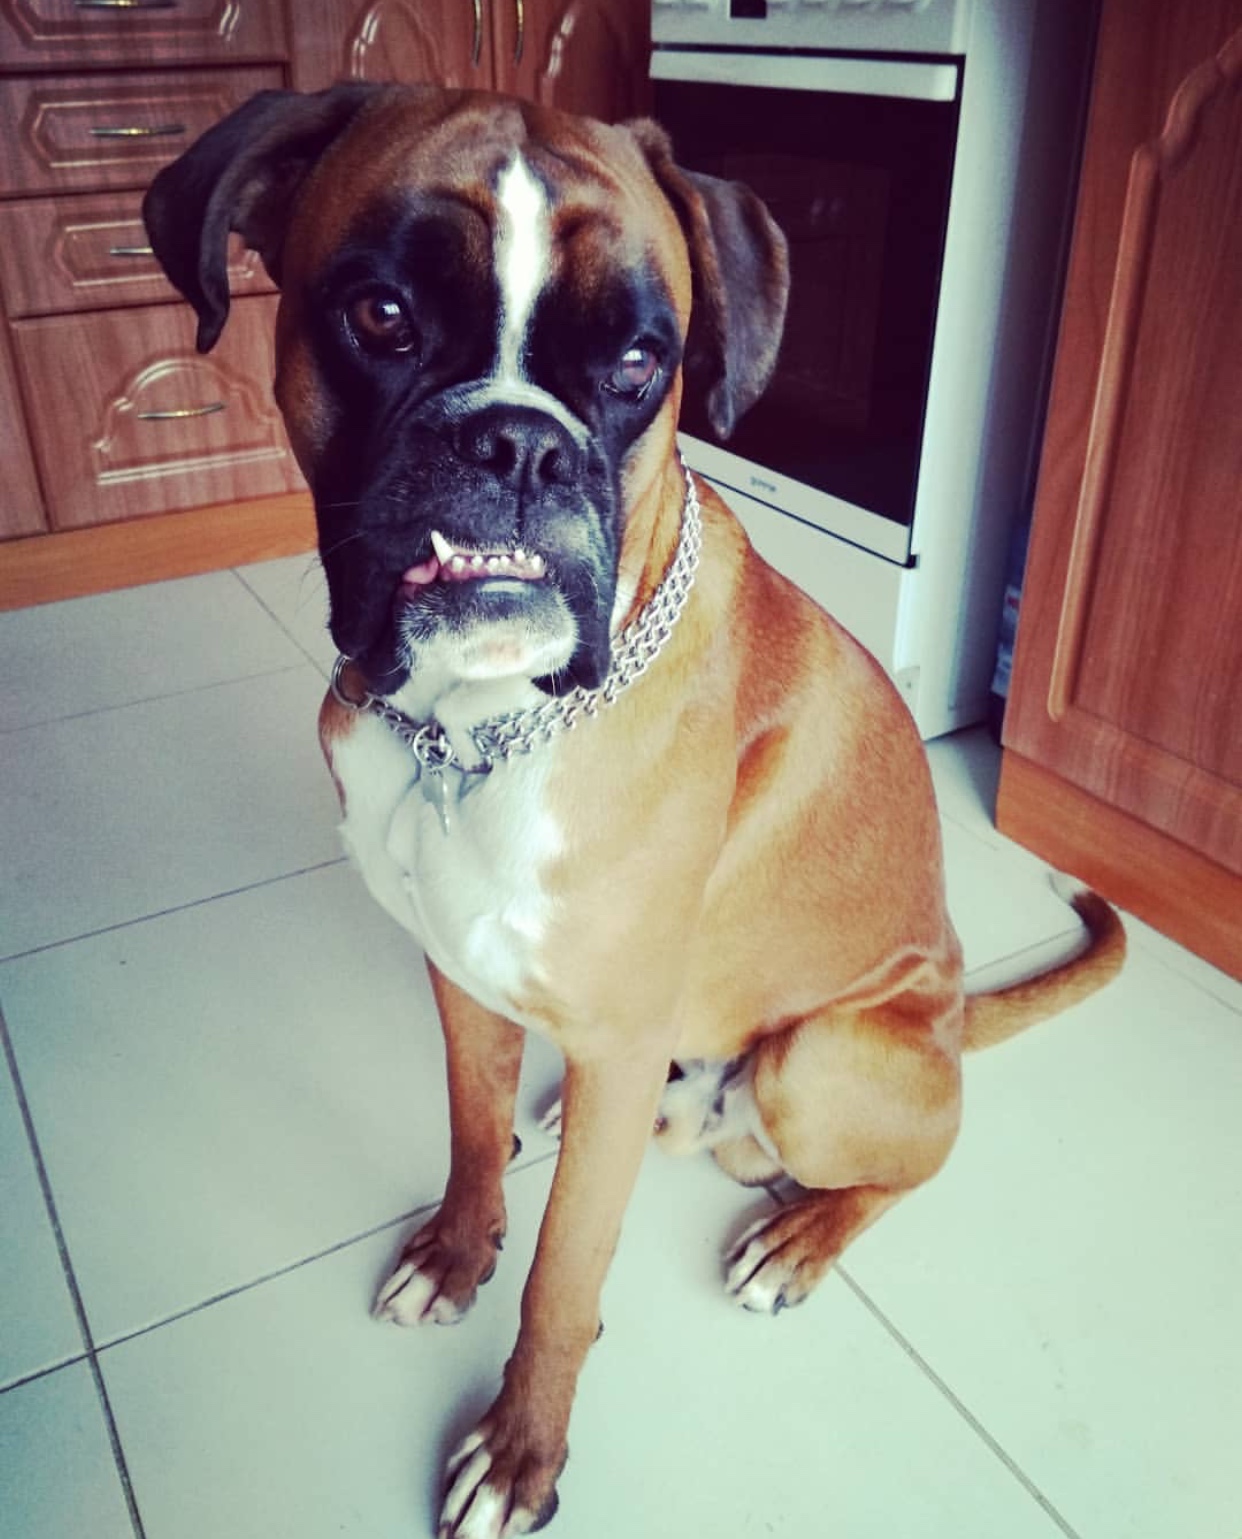 A boxer sitting on the kitchen floor with its sad face